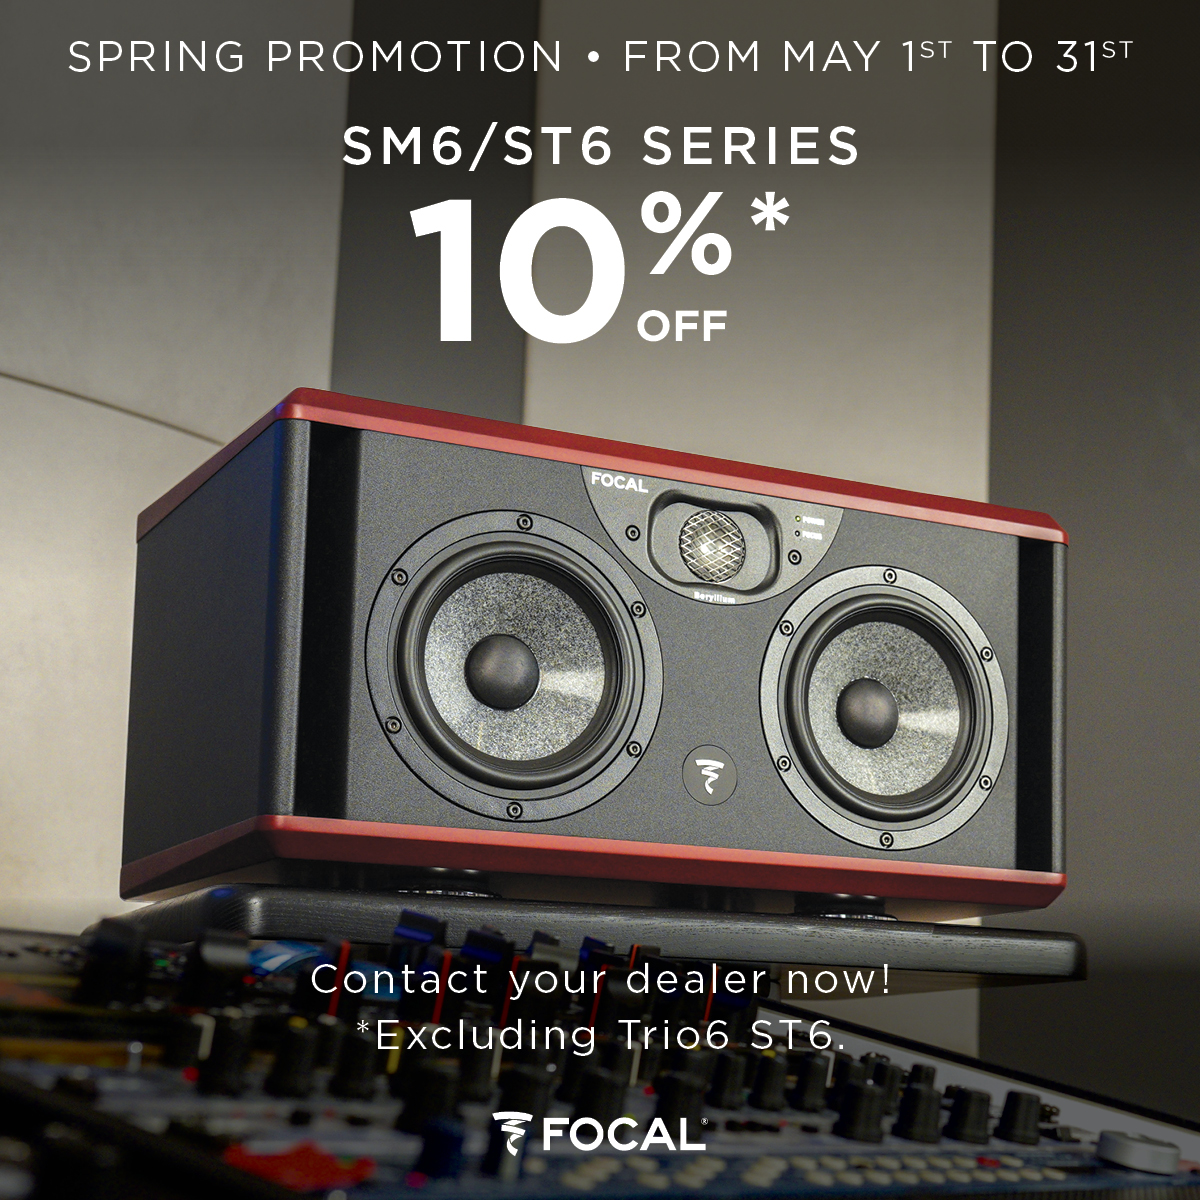 Save on Focal Professional Speakers the month of May!
purewaveaudio.com/specials
⁠
#recordingstudio #recording #recordingengineer #soundengineering #musicmakers #homestudio #musicmaking#mixingengineer #mixengineer #audioengineer #mixingtips #recordingtips #Focal professional,